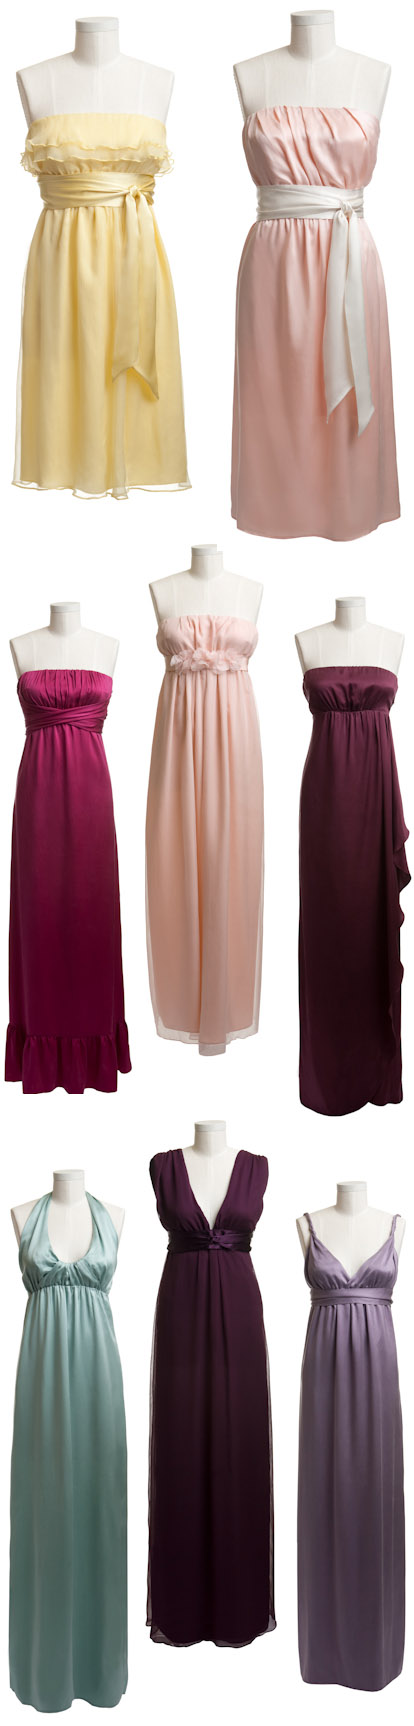 stylish, modern bridesmaids' dresses from Swoon